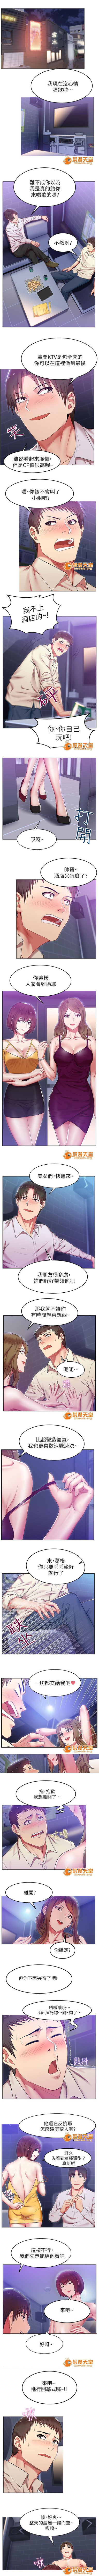 Two 共事密友 1-27 Gape - Page 9